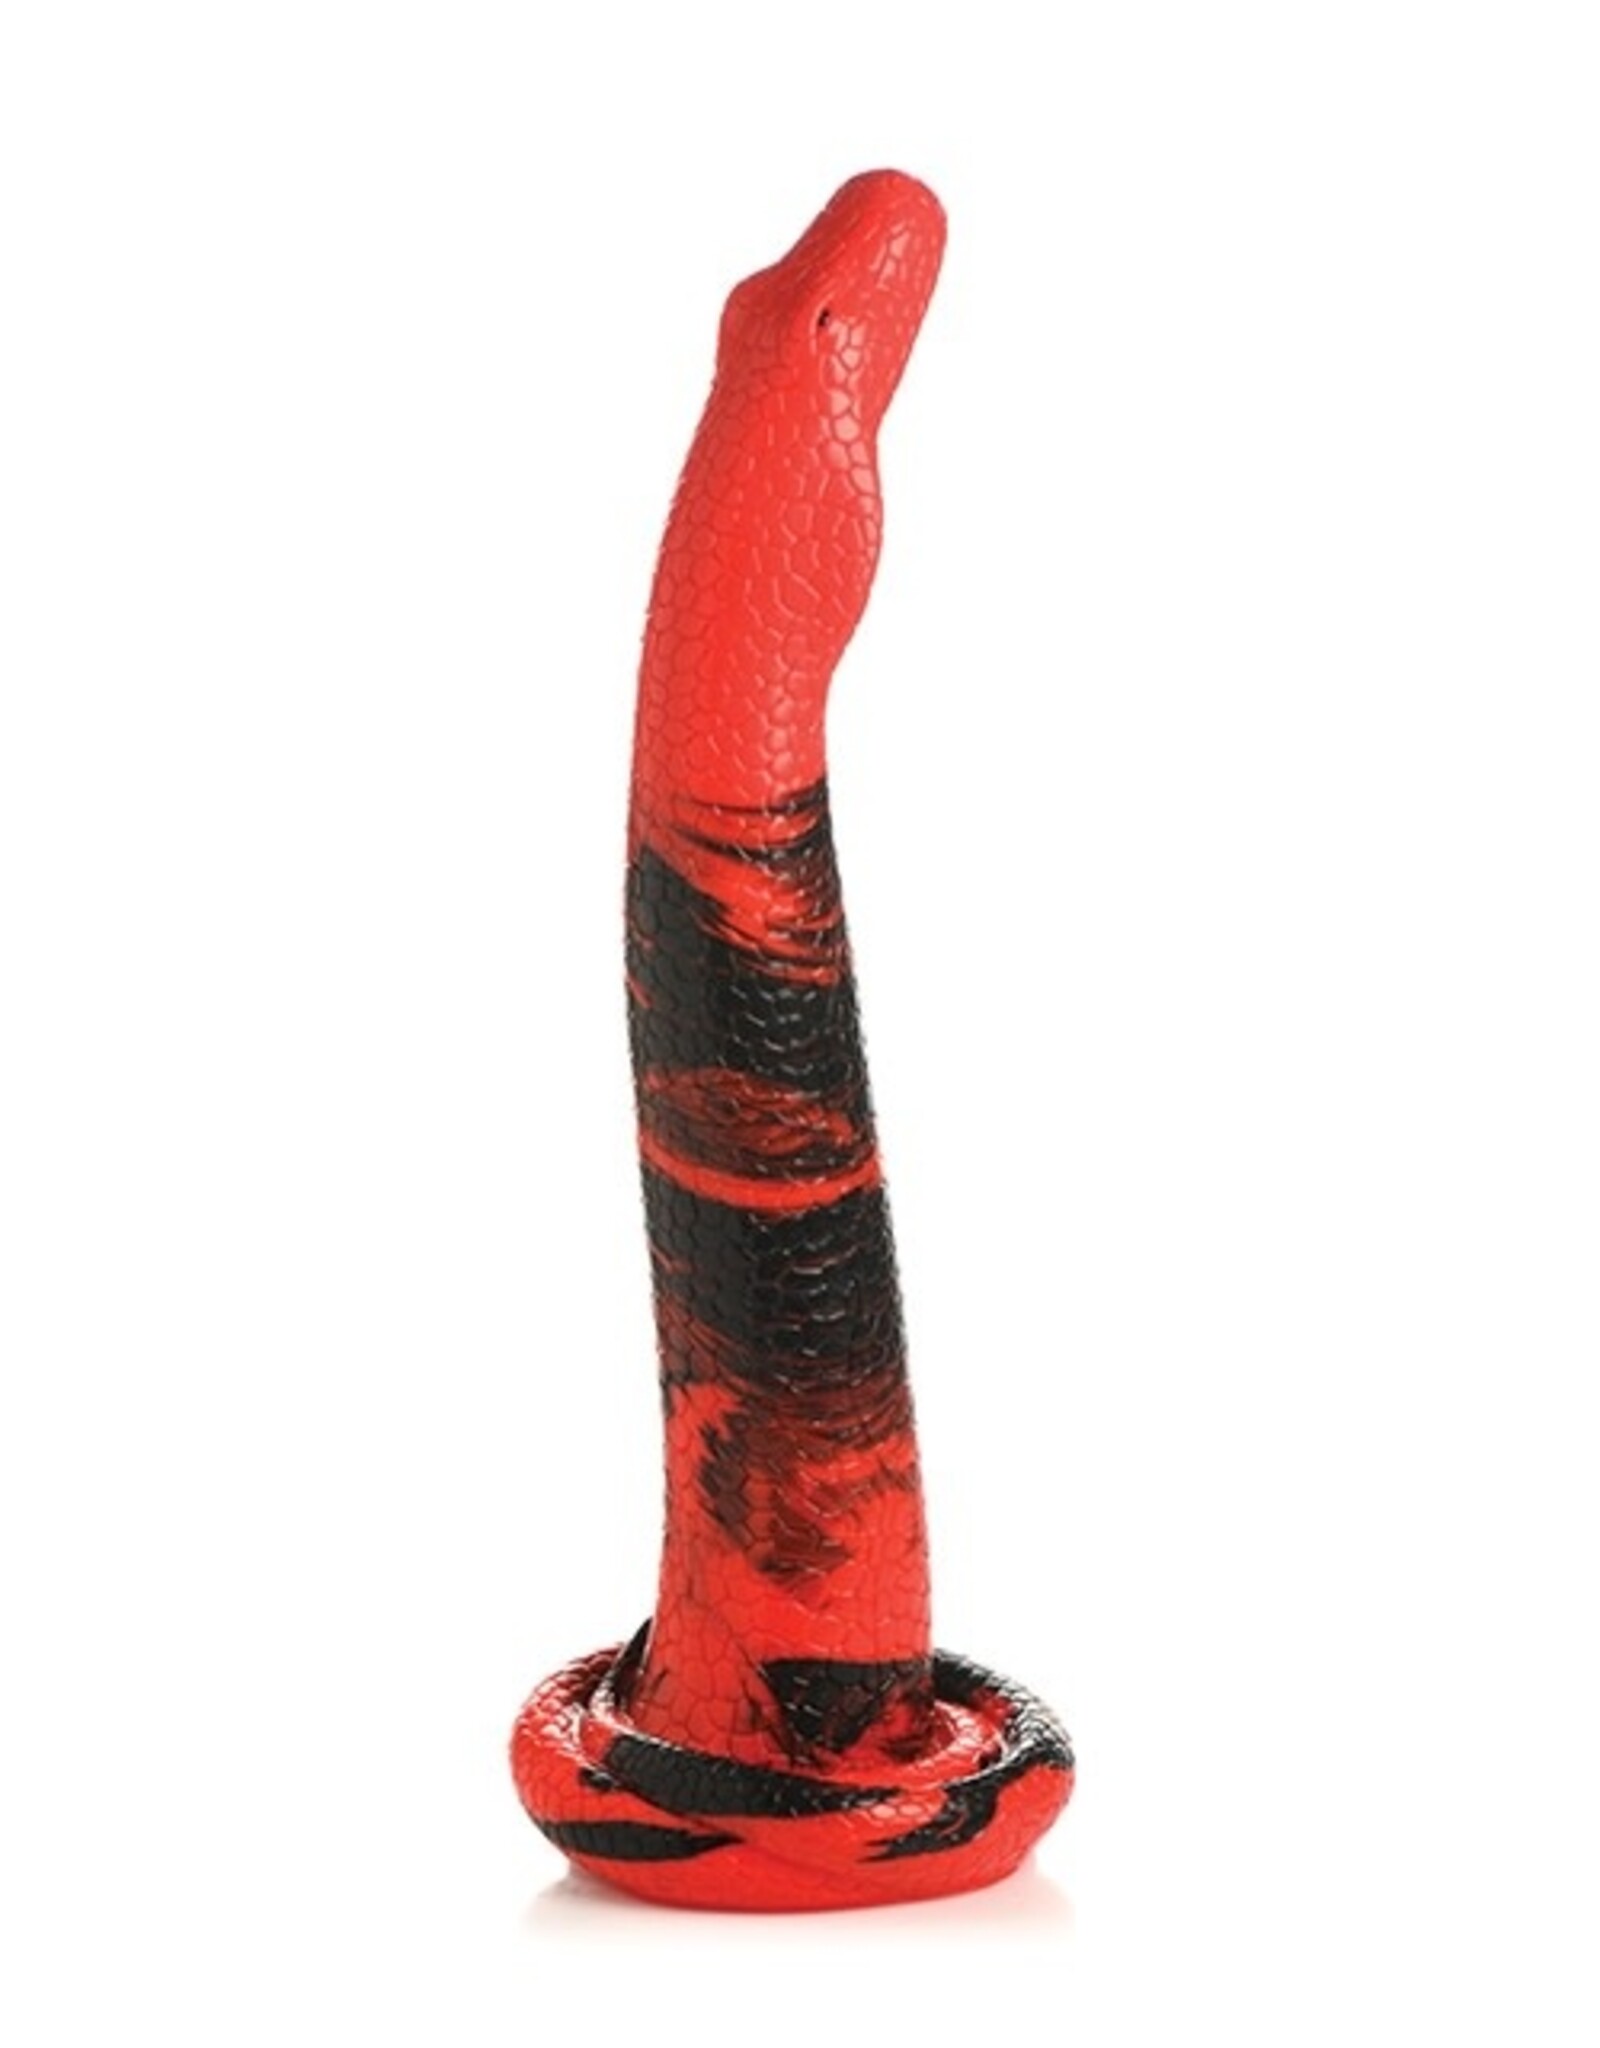 XR Brands Creature Cocks - King Cobra - Large 14" Long Silicone Dong